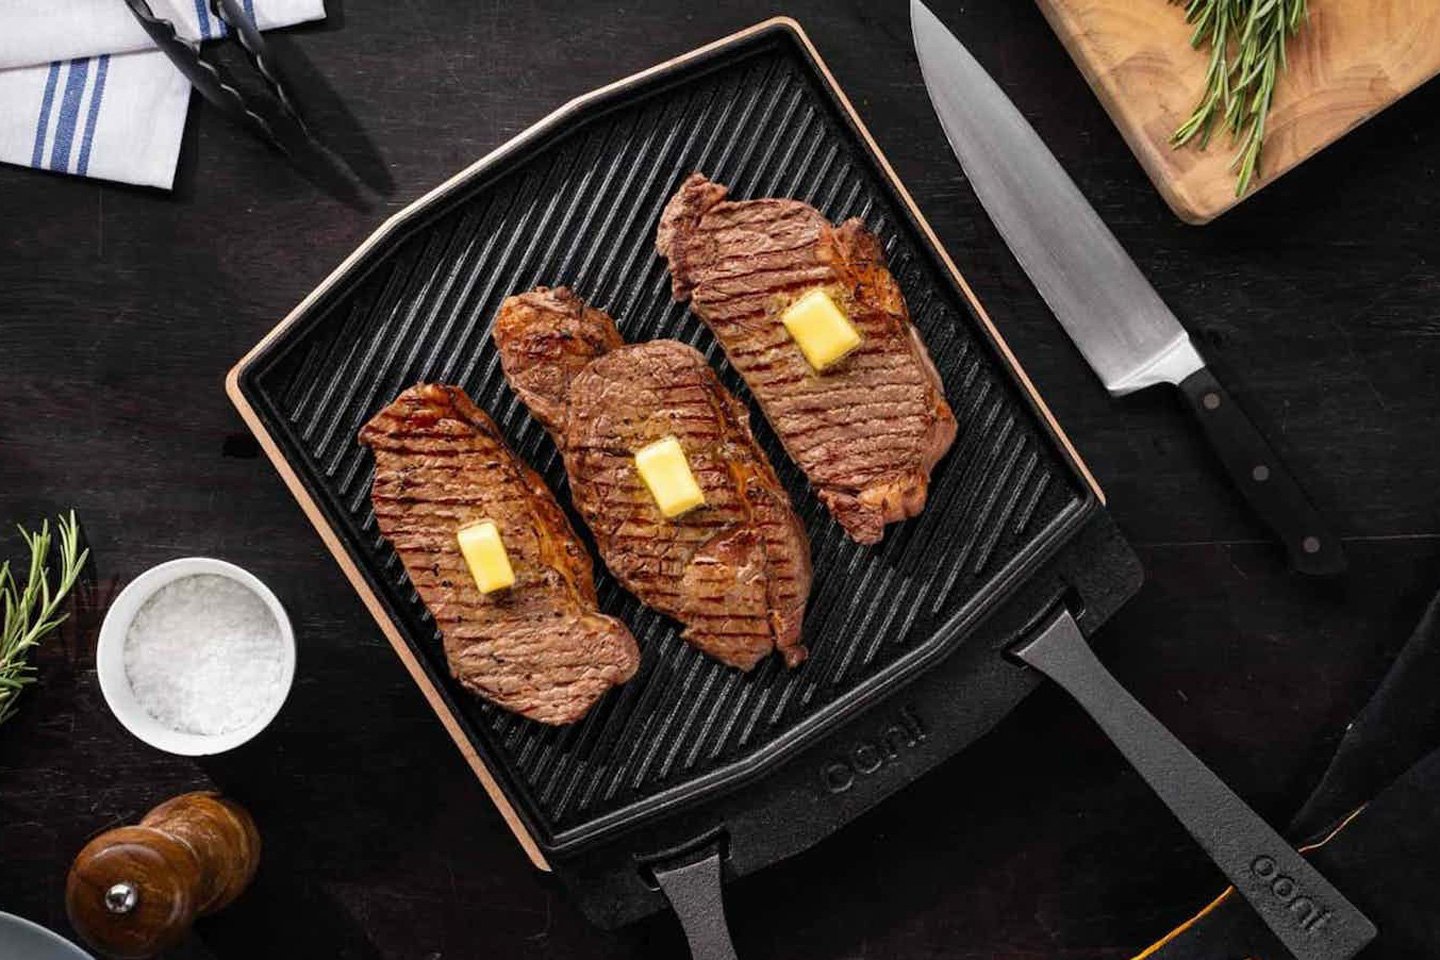 https://www.yankodesign.com/images/design_news/2022/05/ooni-dual-sided-sizzler-grill-plate/ooni_dual_sided_grizzler_plate_1.jpg